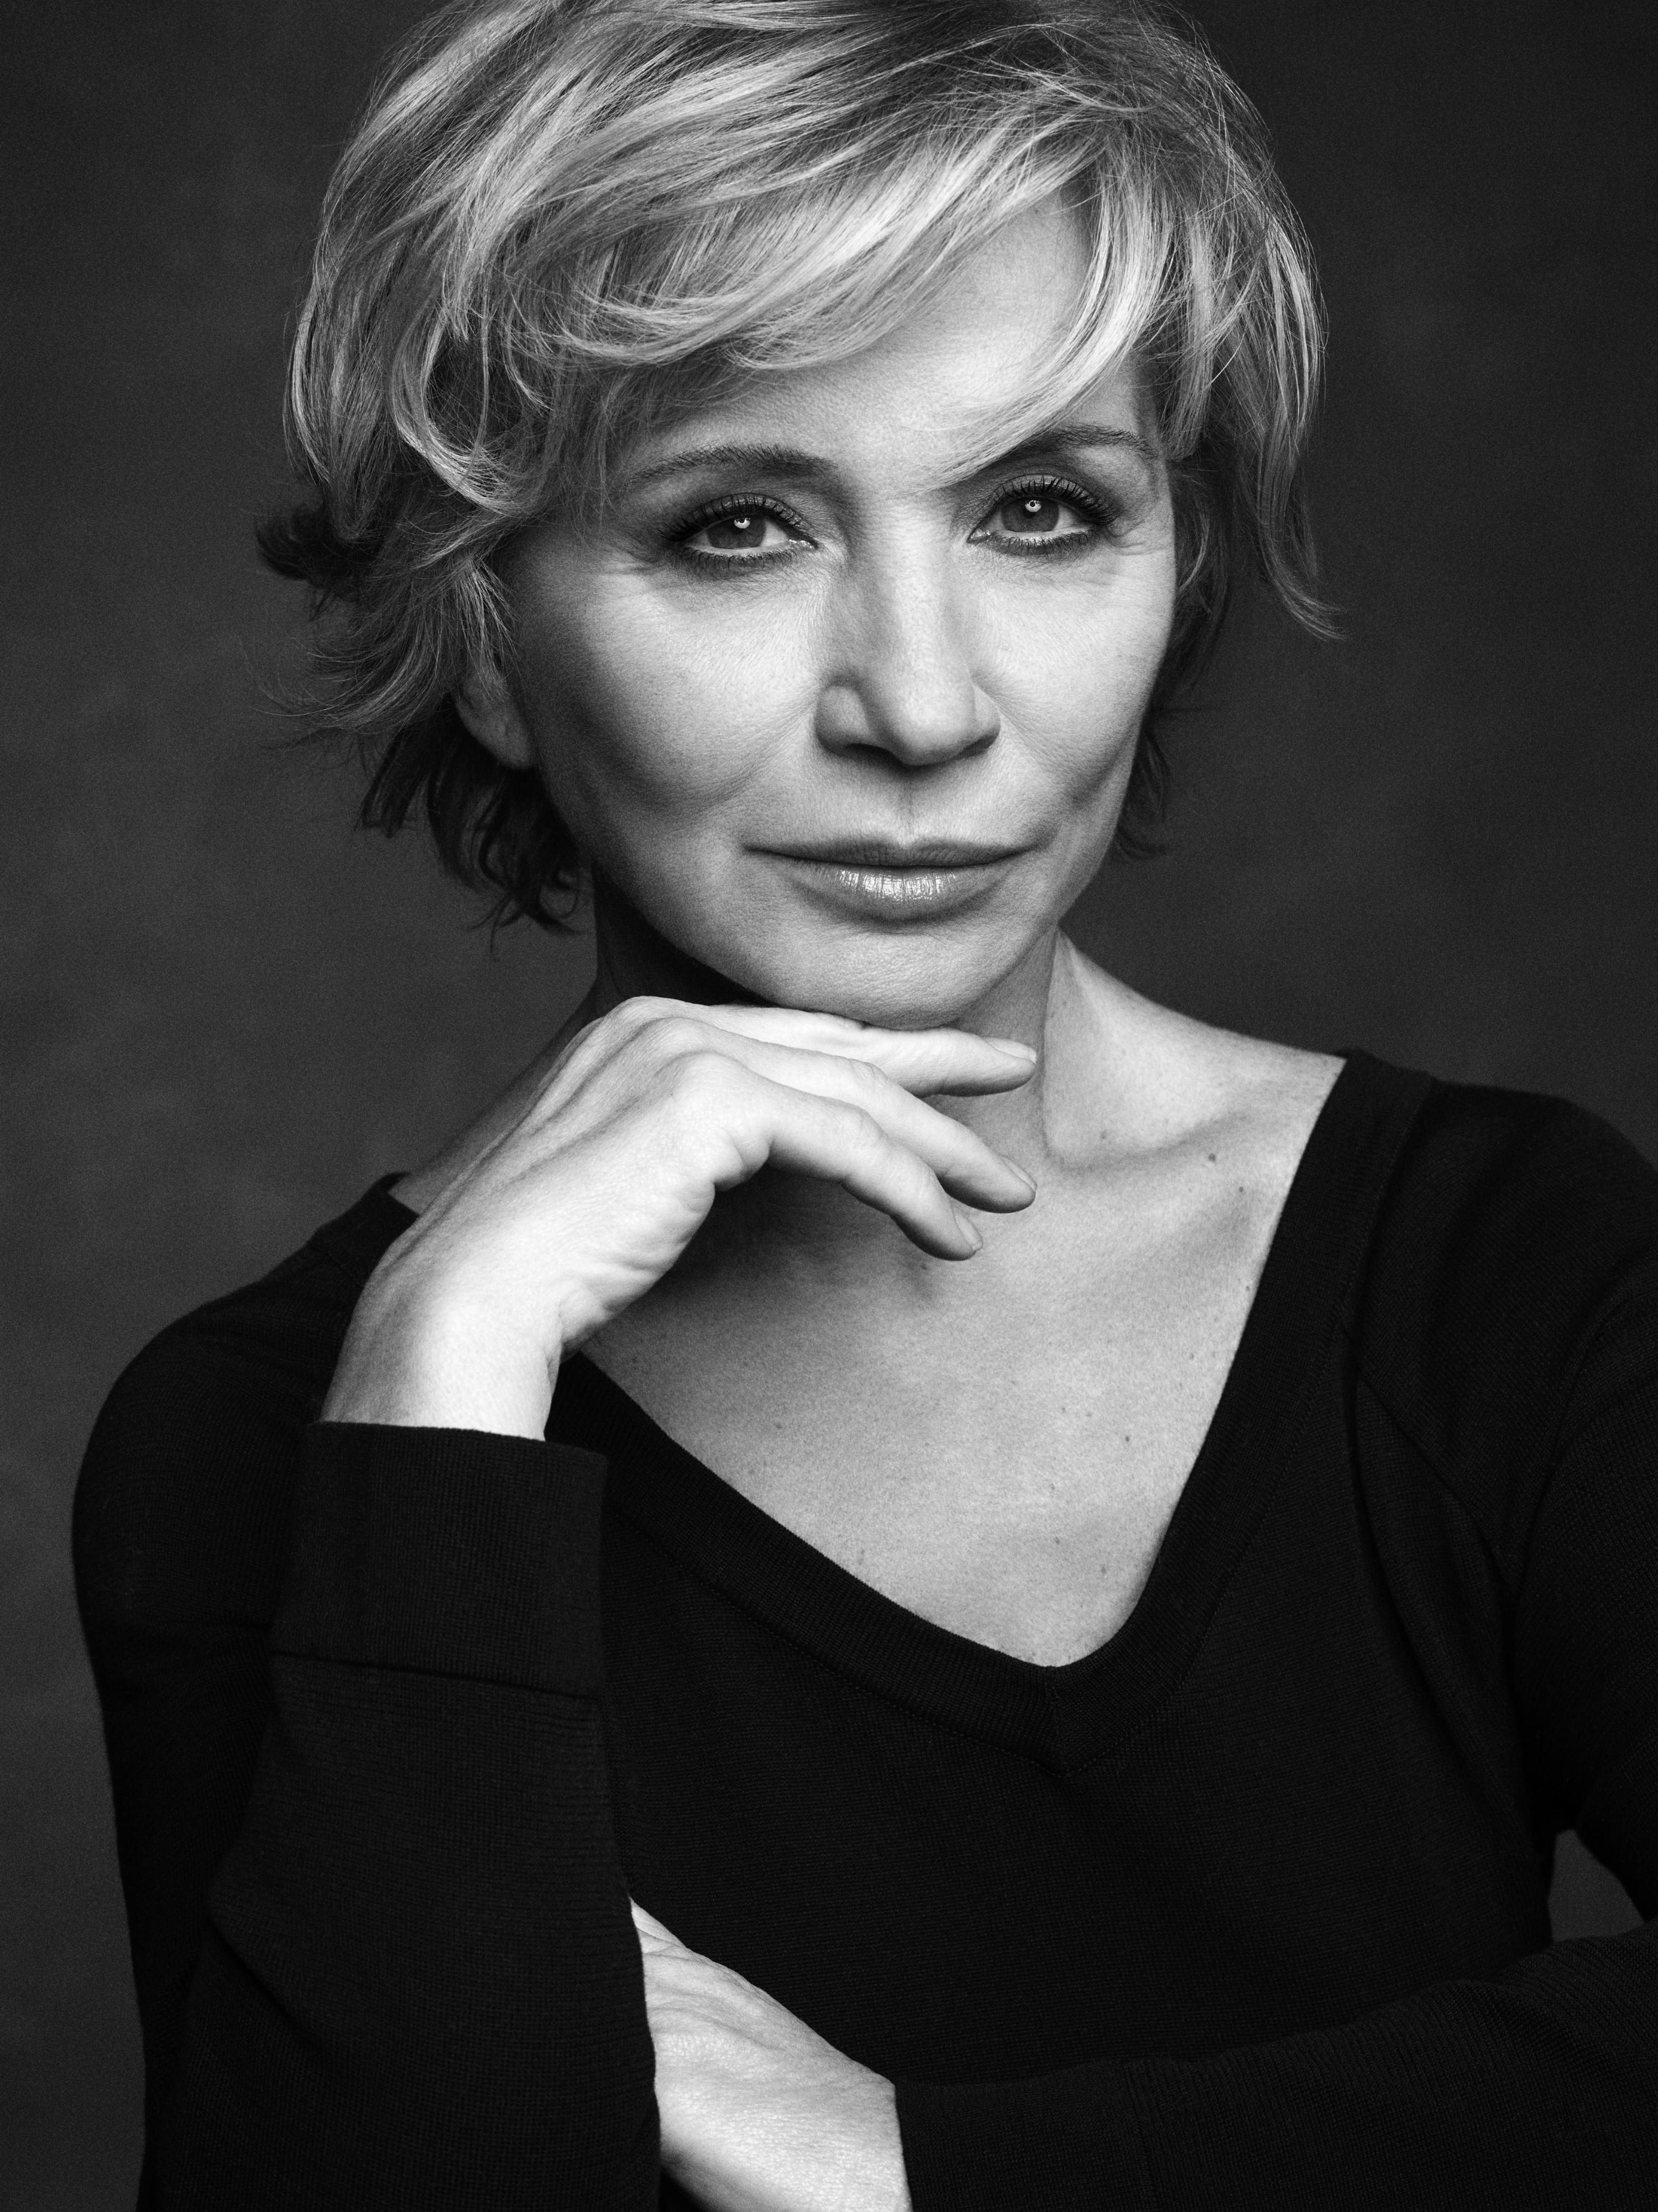 Alberta Ferretti will present a keynote exploring the impact wellness is having on the fashion industry during the 12th-annual GWS at Technogym Village, Cesena, Italy from October 6-8, 2018. Portrait